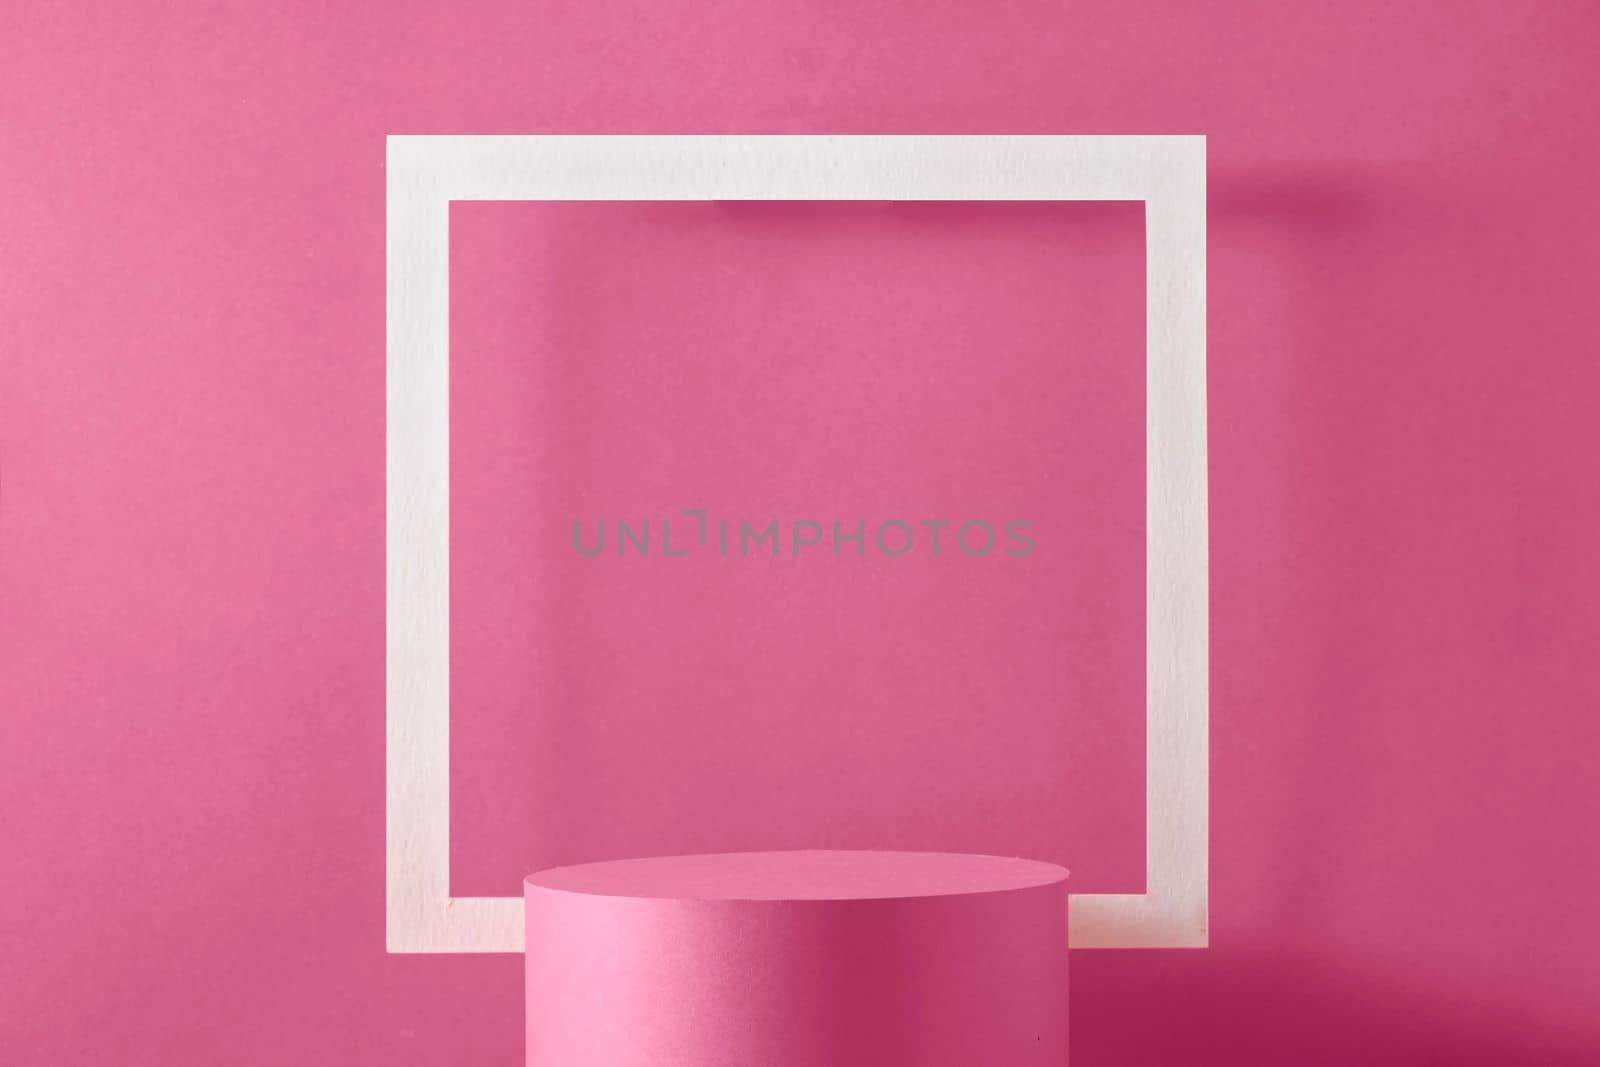 Background podium frame for showing and demonstrating the product of the Magenta trend color by sergii_gnatiuk